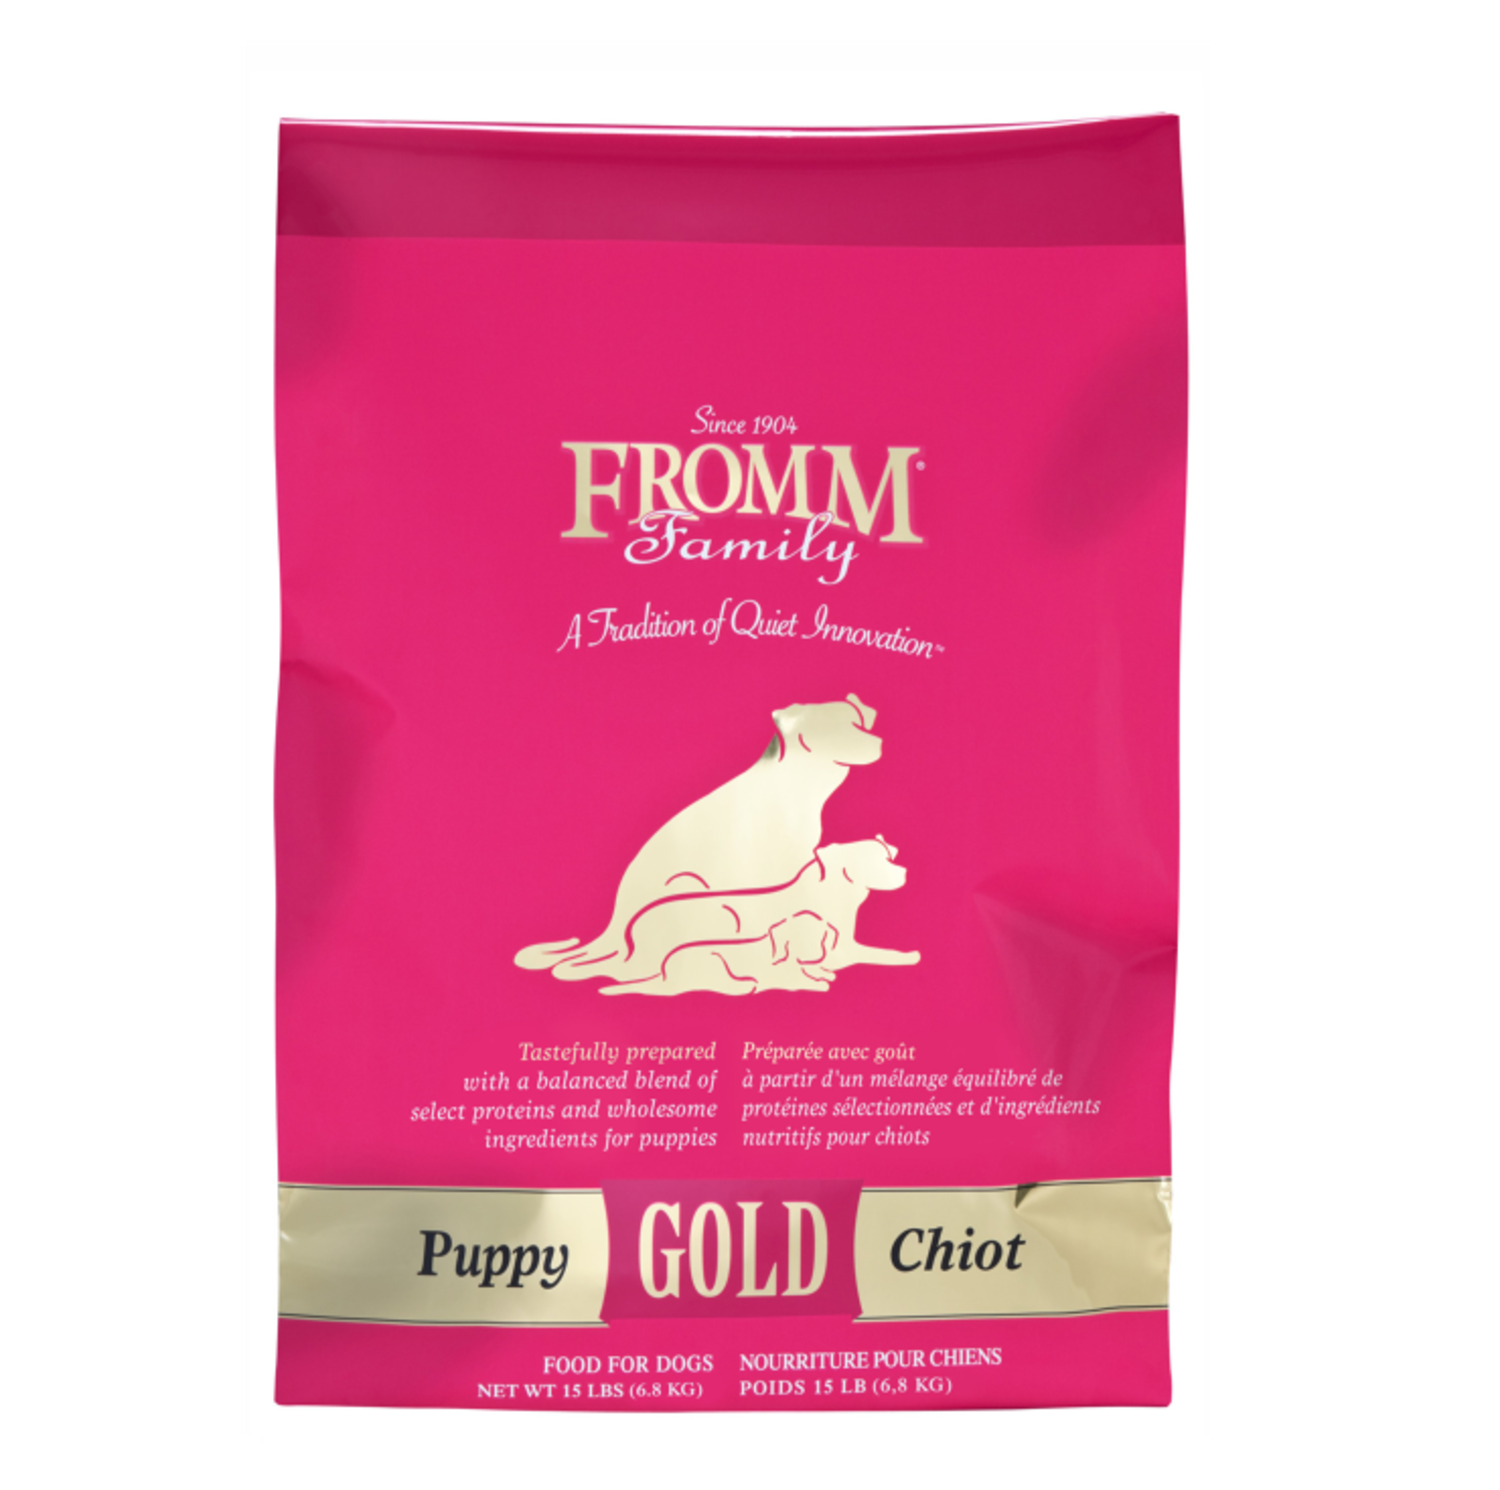 FROMM GOLD PUPPY - Paws on Chicon